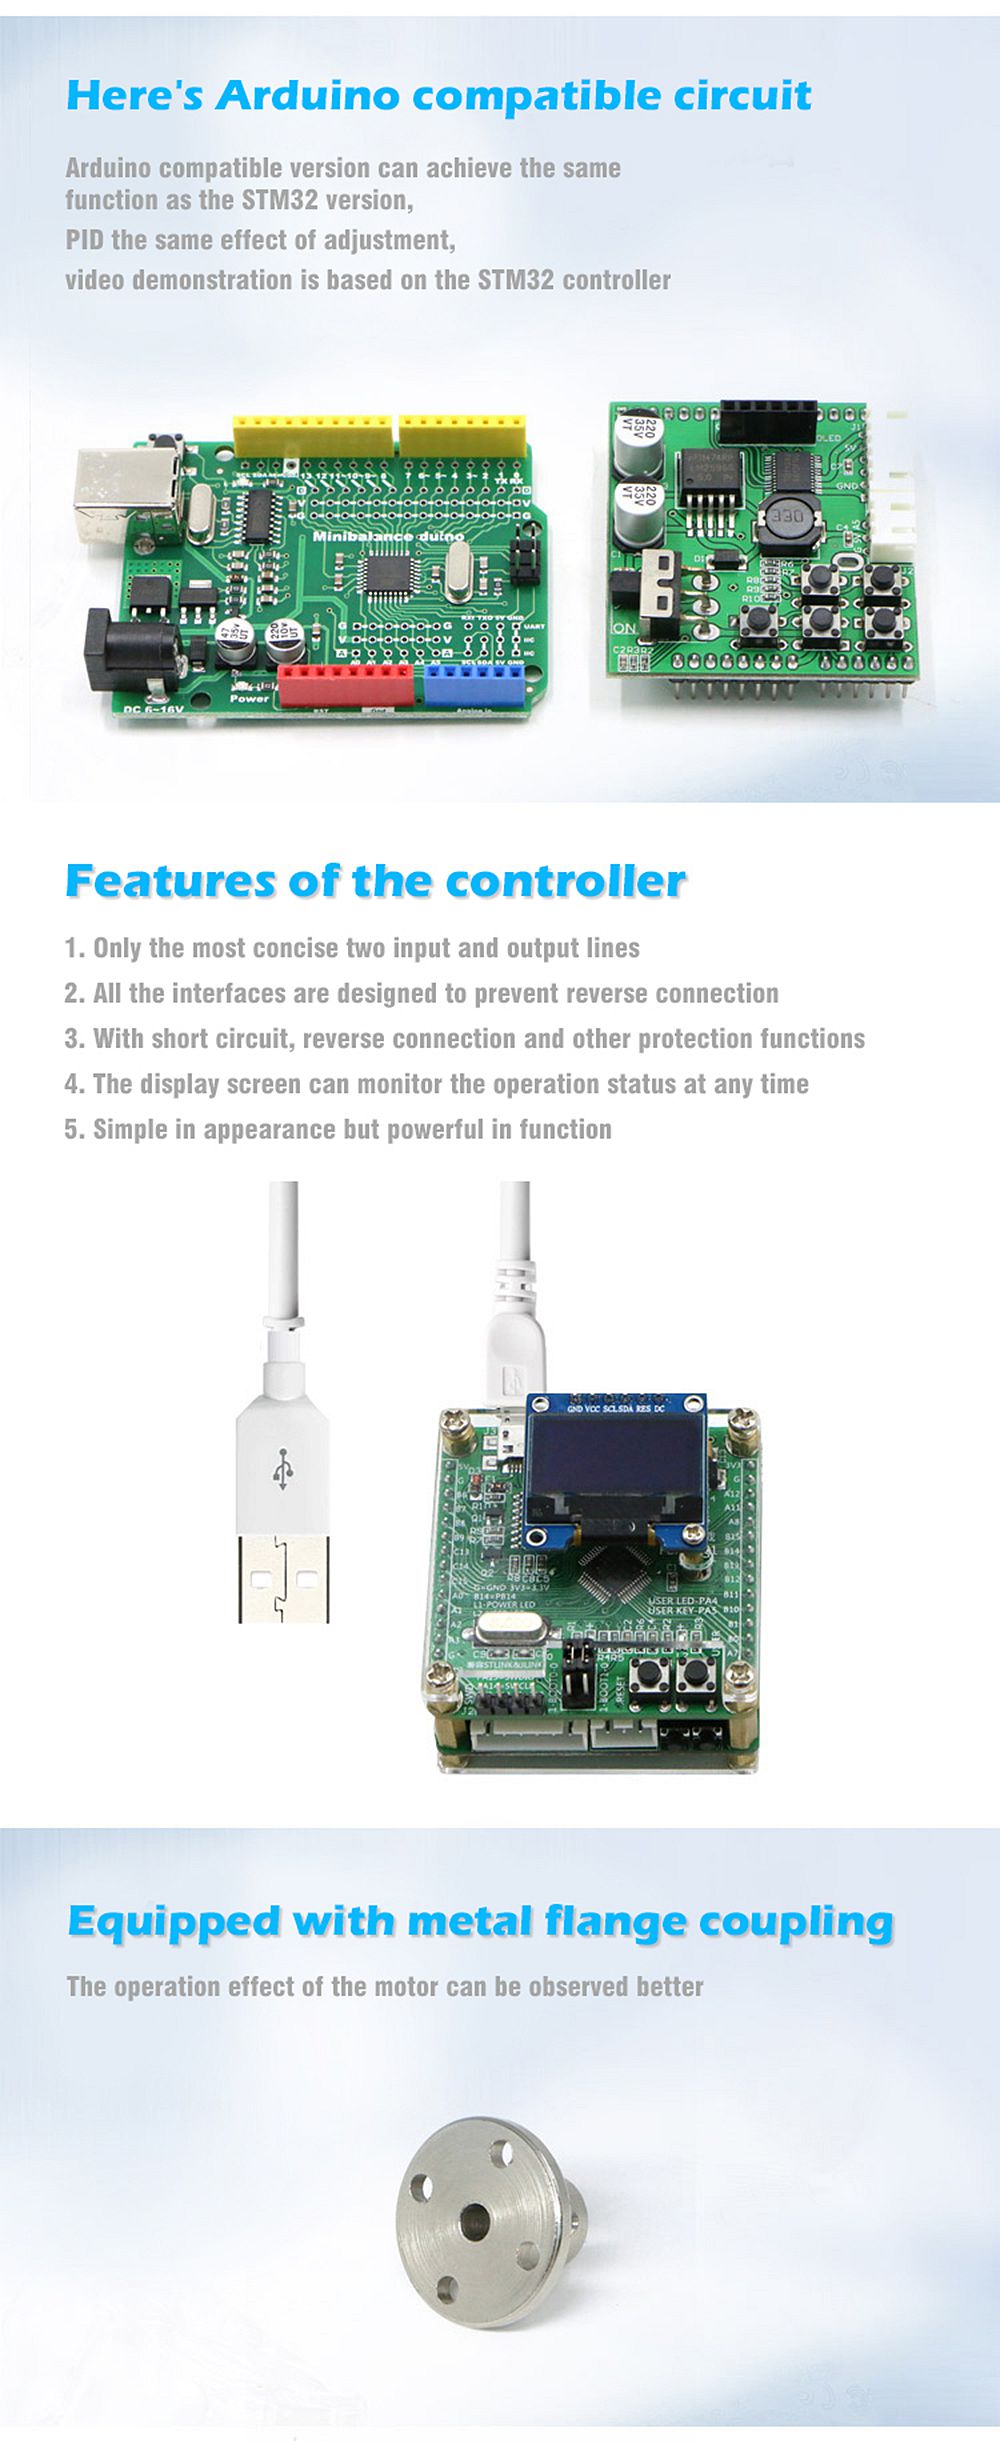 DC-Motor-PID-Learning-Kit-Encoder-Position-Control-Speed-Control-PID-Development-Board-1690187